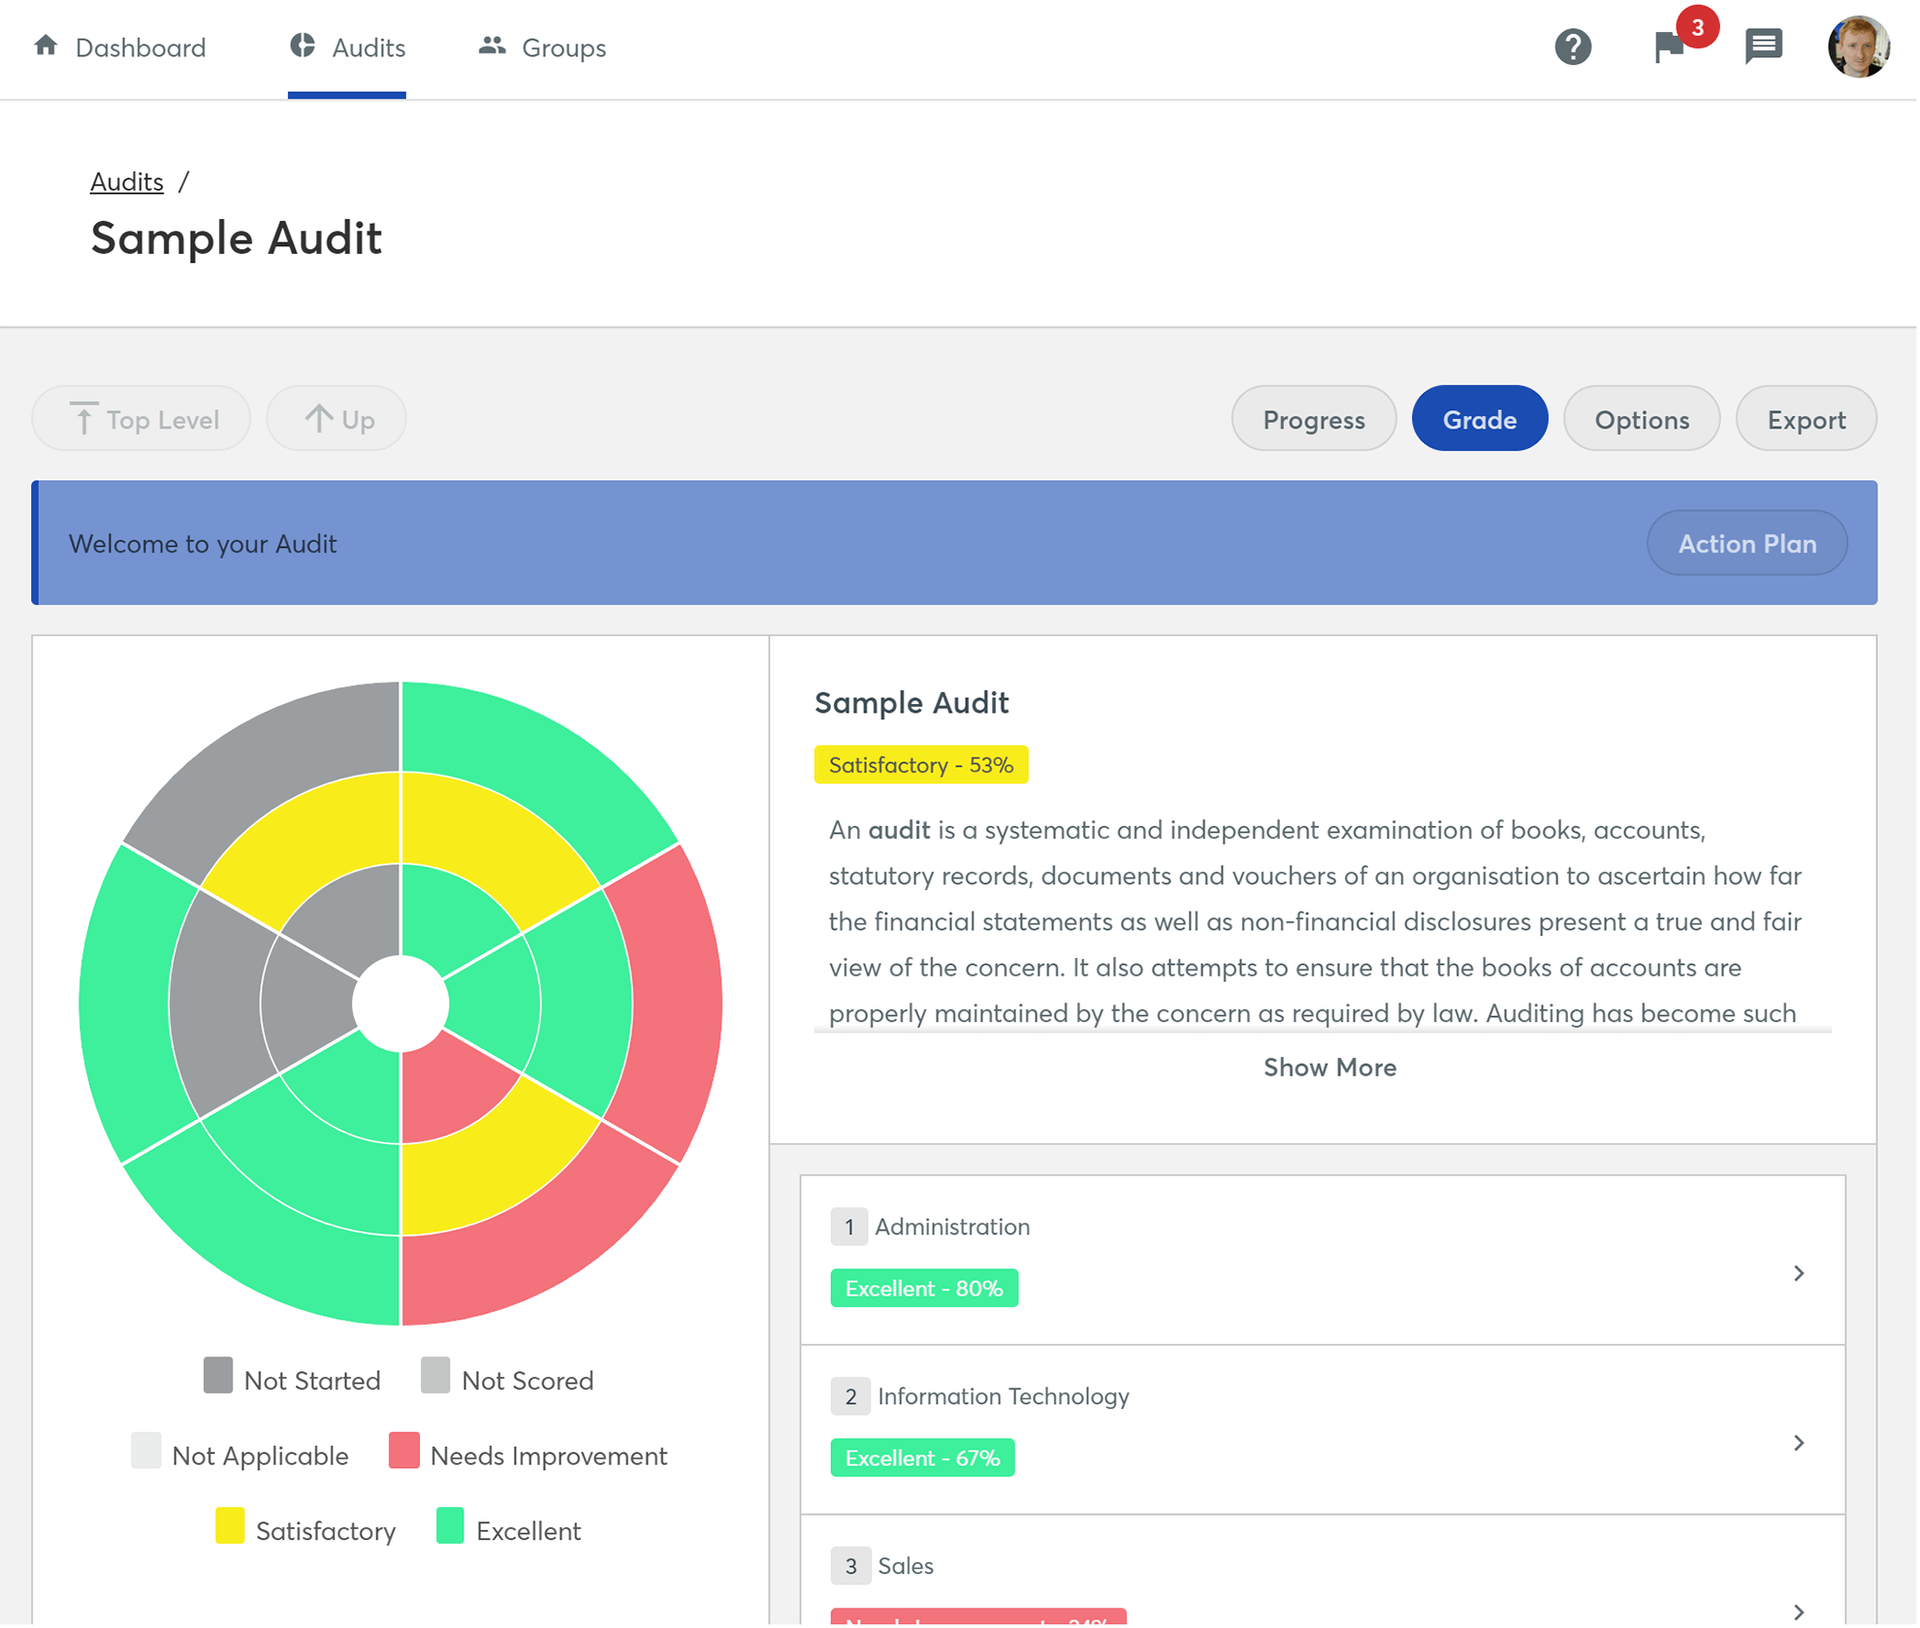 Screenshot of the Audit Overview